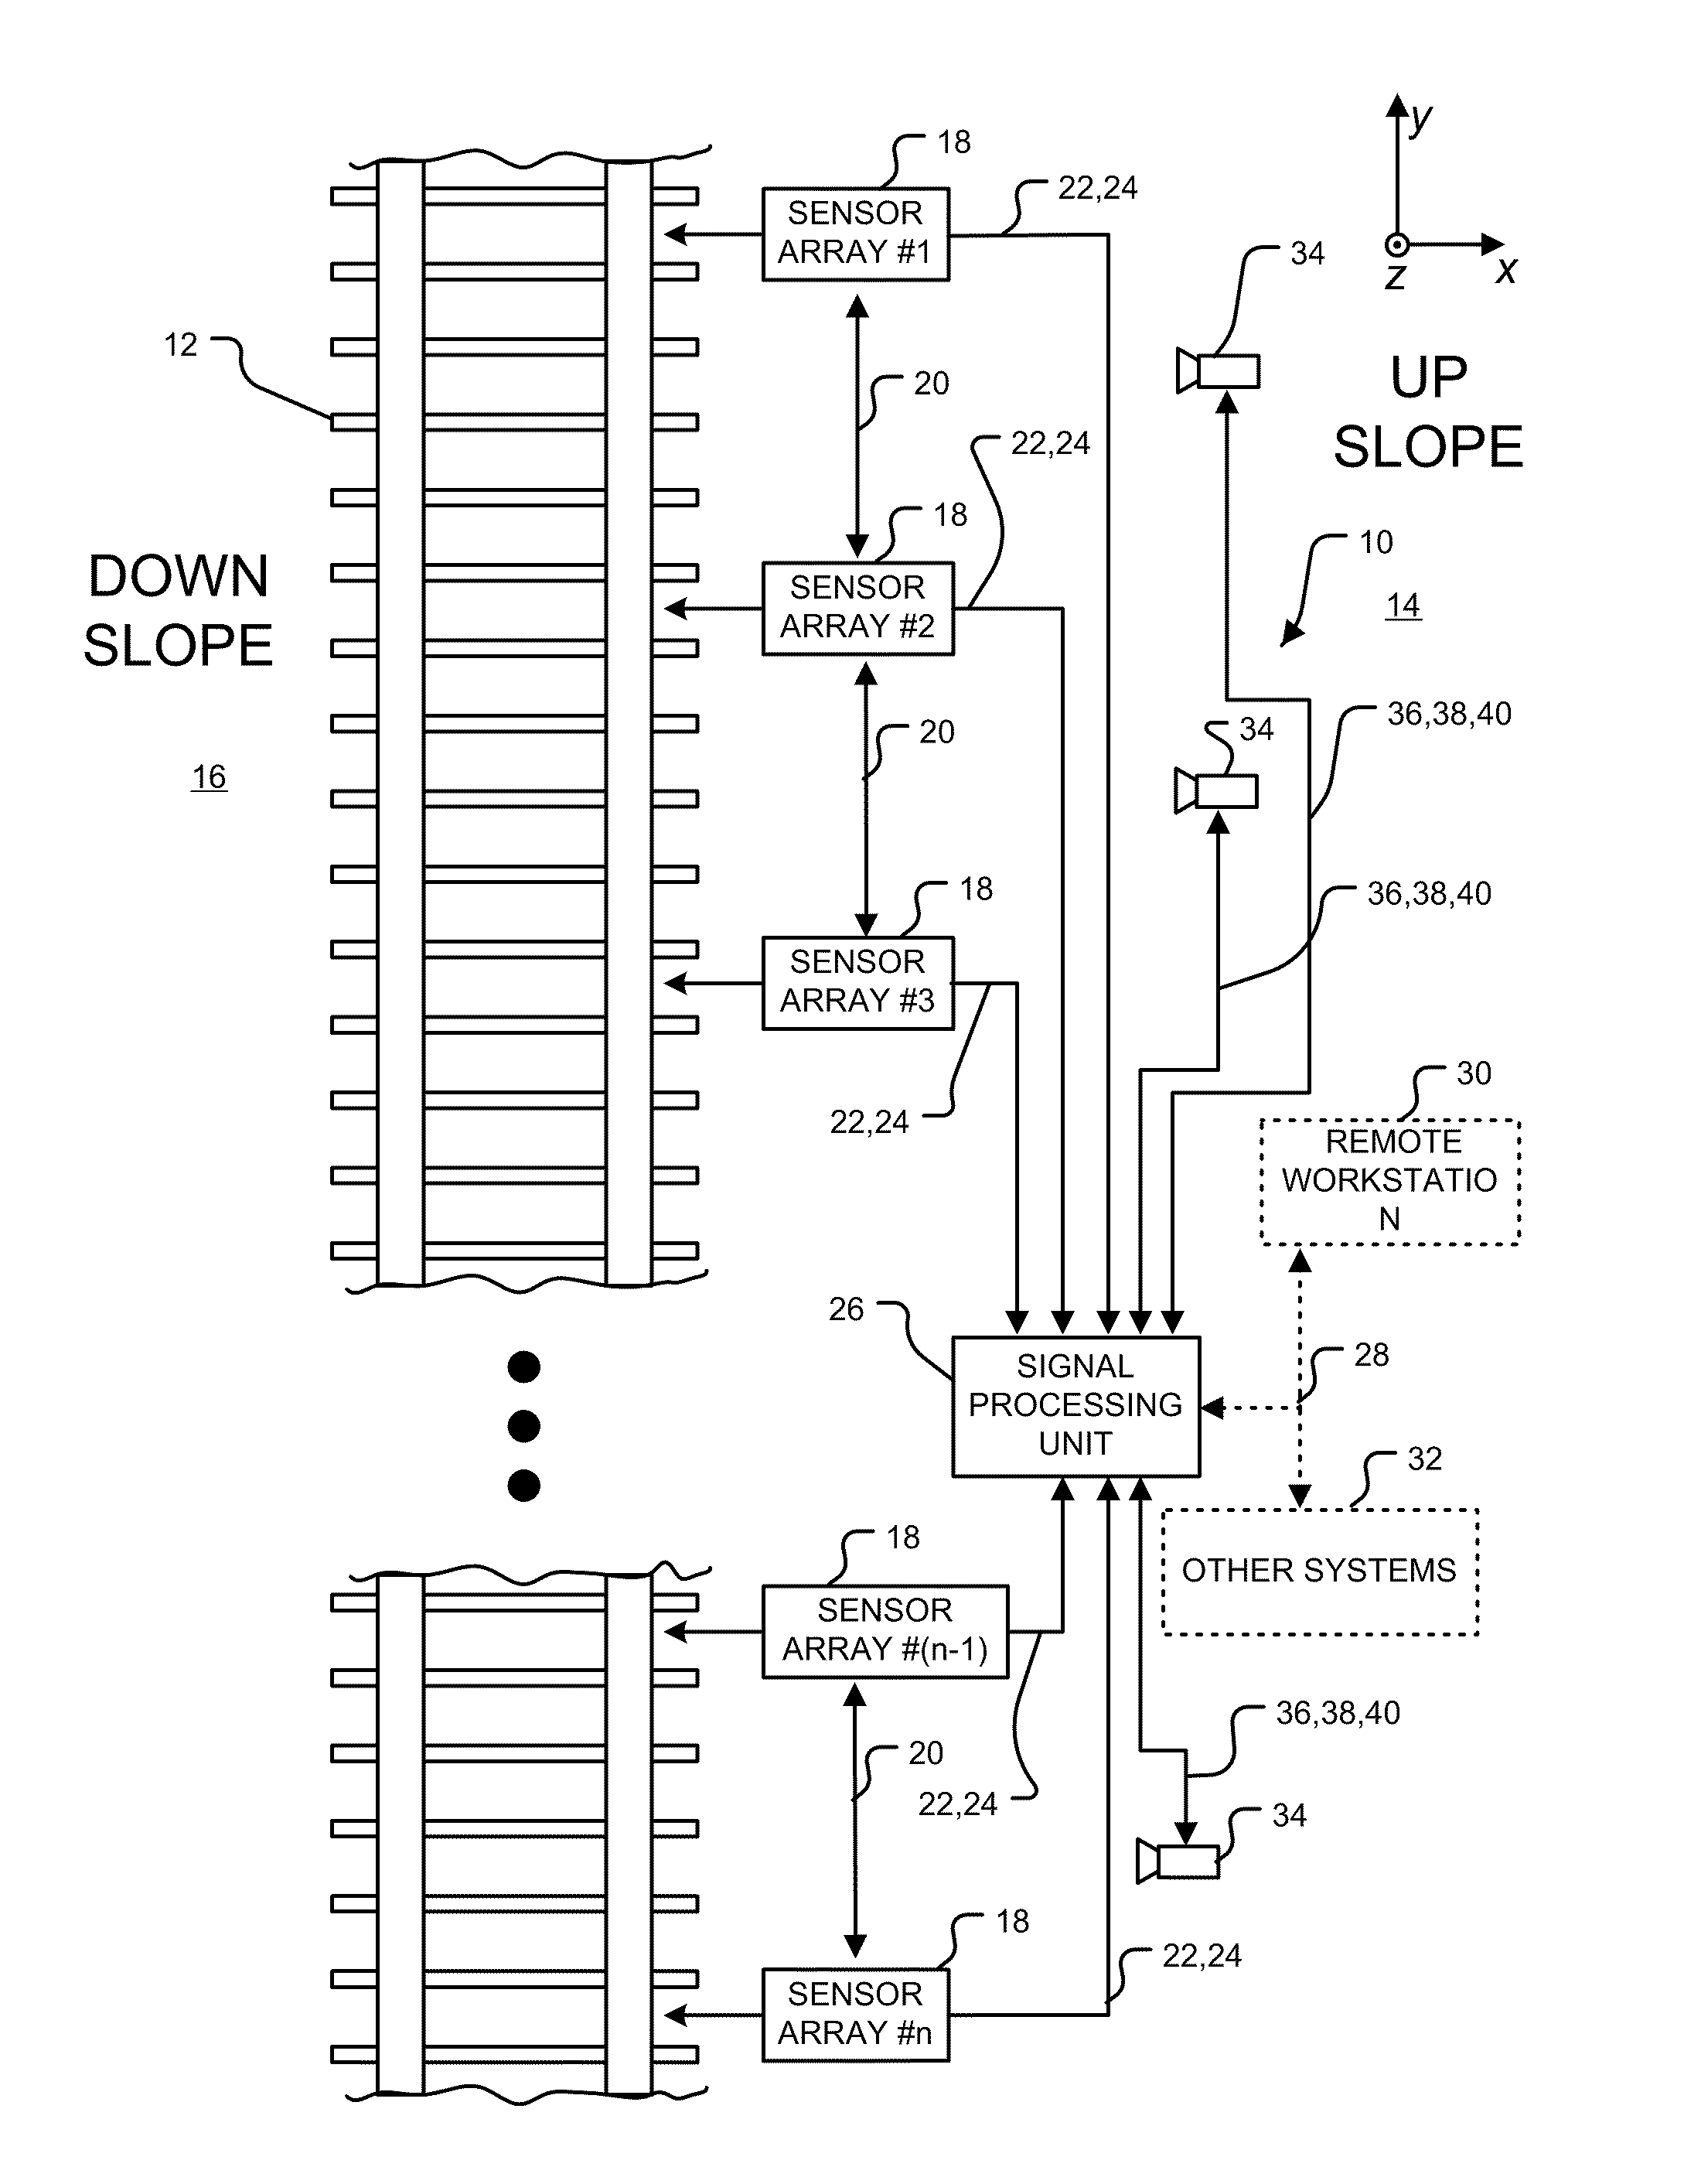 System and method for detecting rock fall